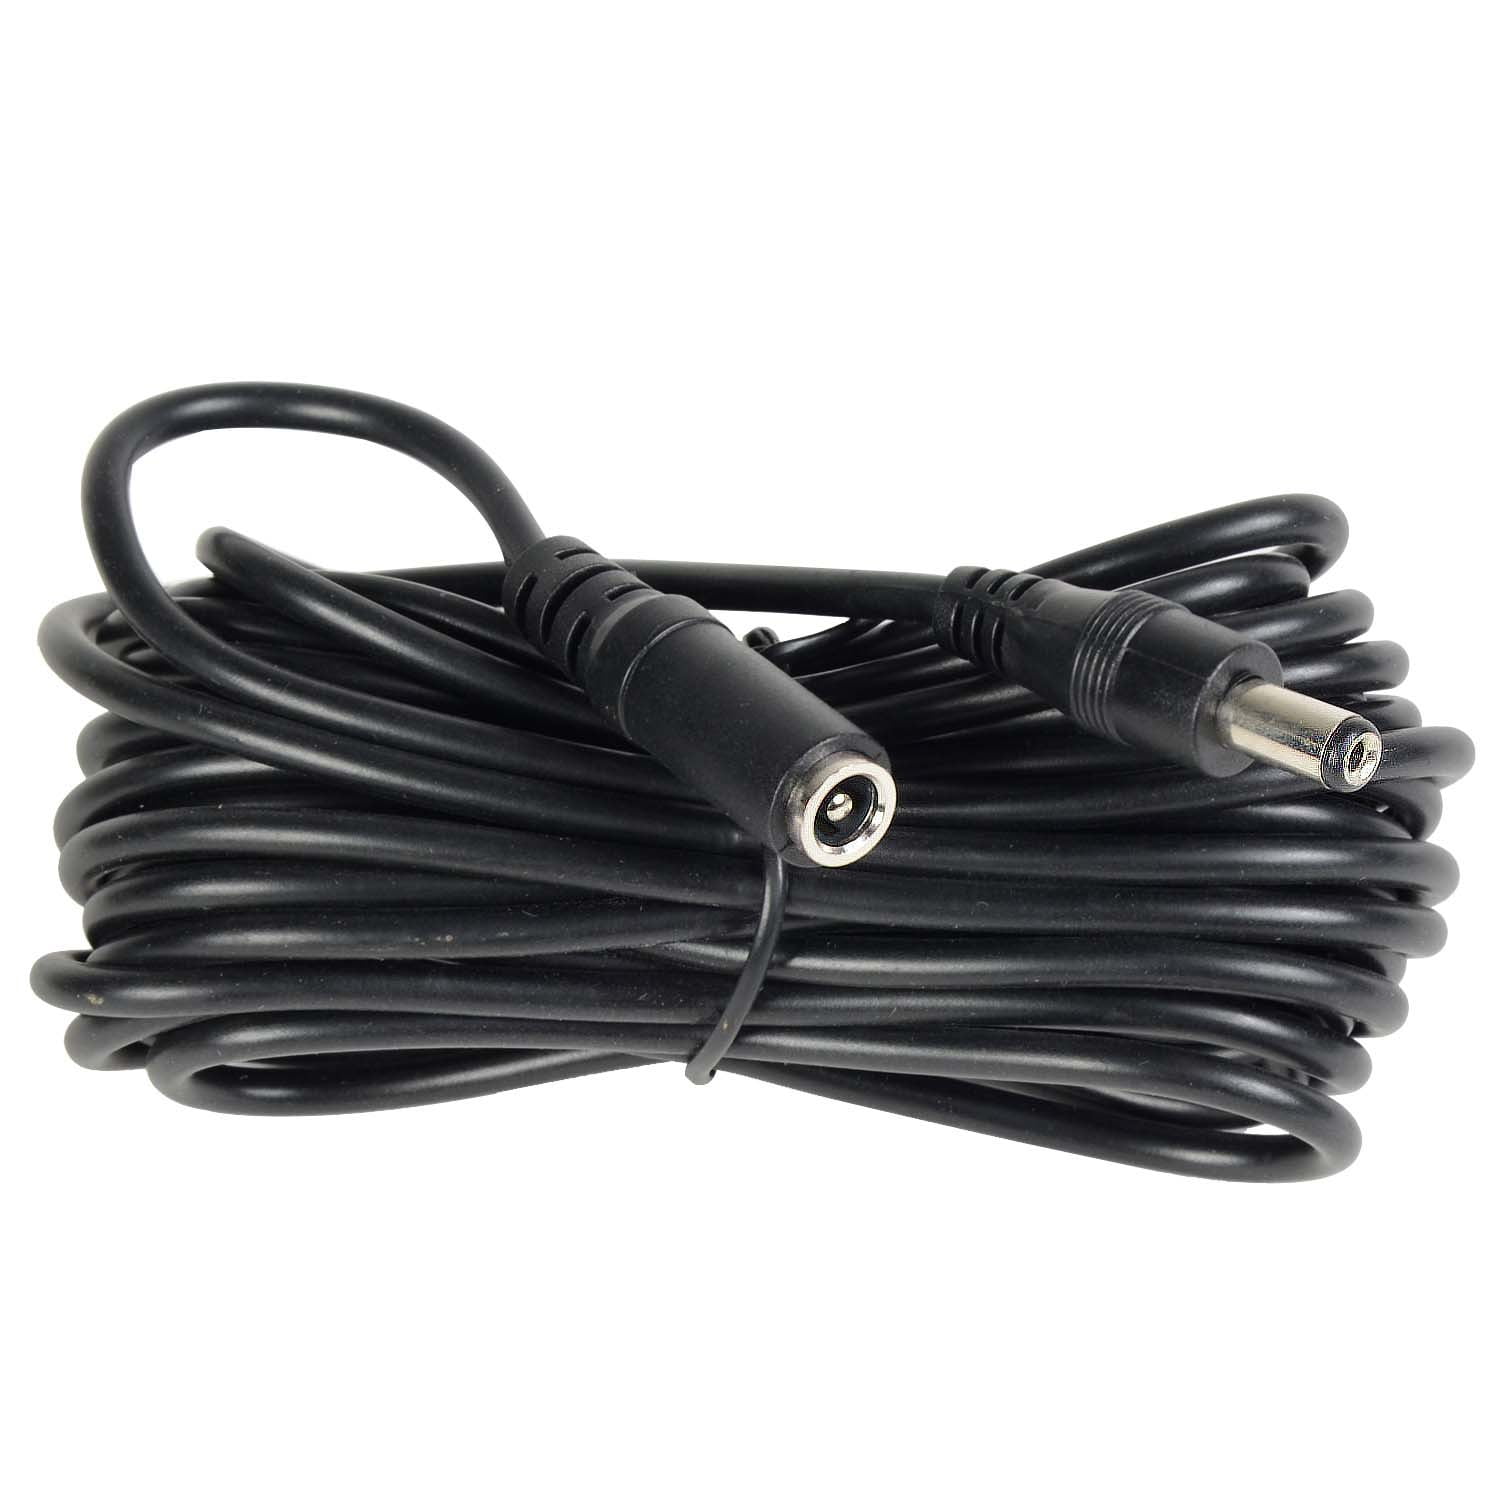 DC Power Extension Cord Cable for LED Light or Security Camera 10ft  2.1x5.5mm